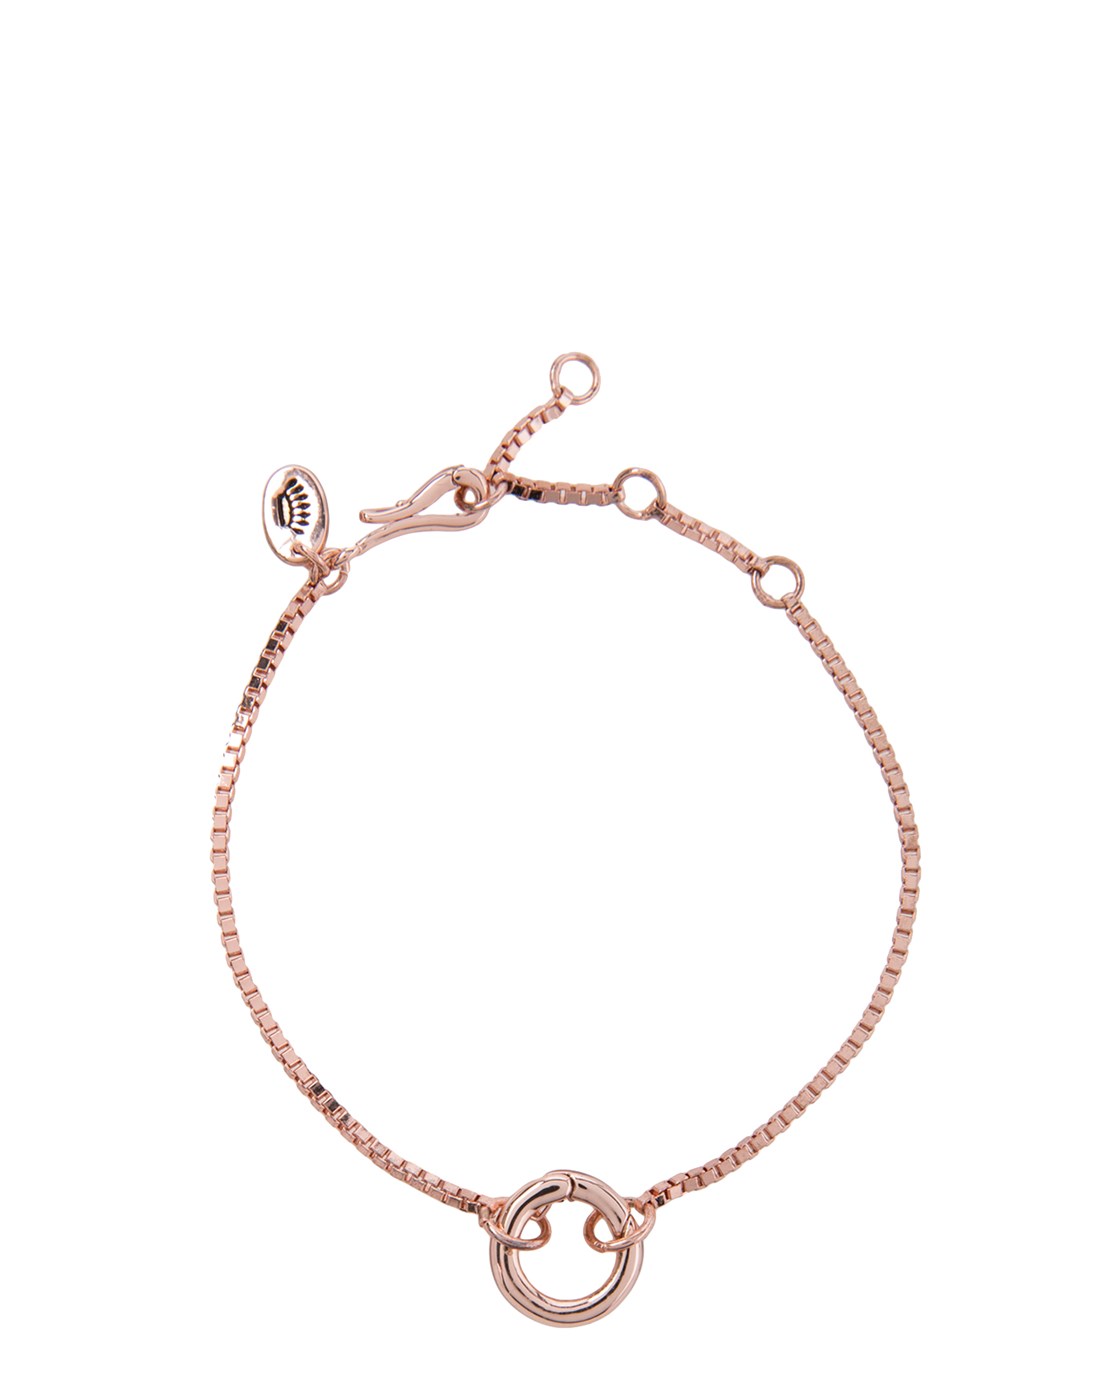 Juicy Couture Couture Yourself Clip Starter Bracelet